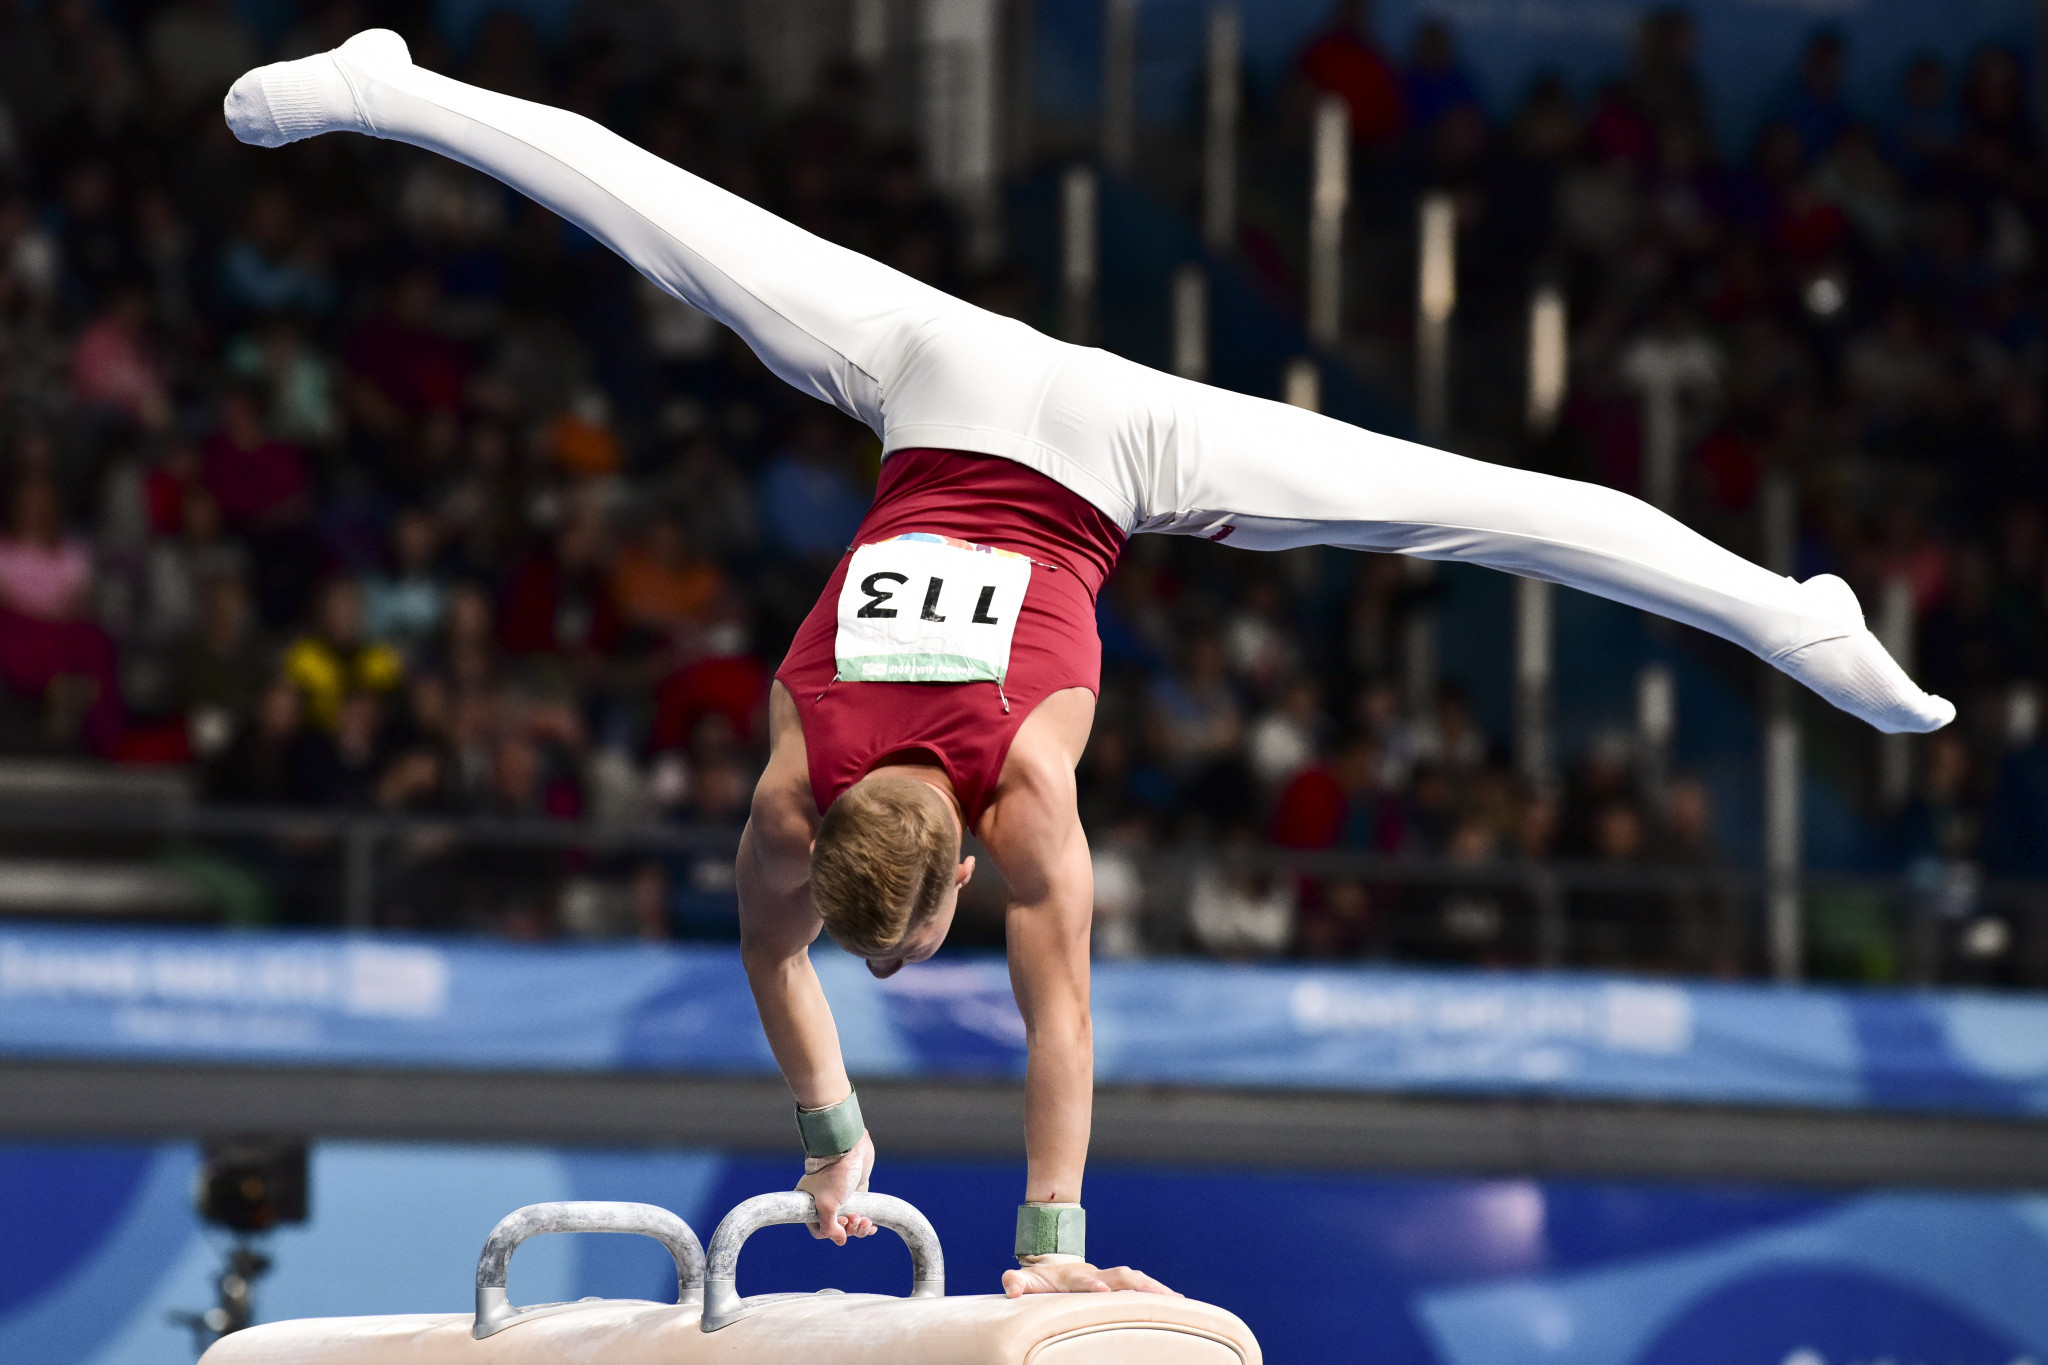 Youth Olympic silver medallist Krisztián Balazs will be a home hope for Hungary ©Getty Images